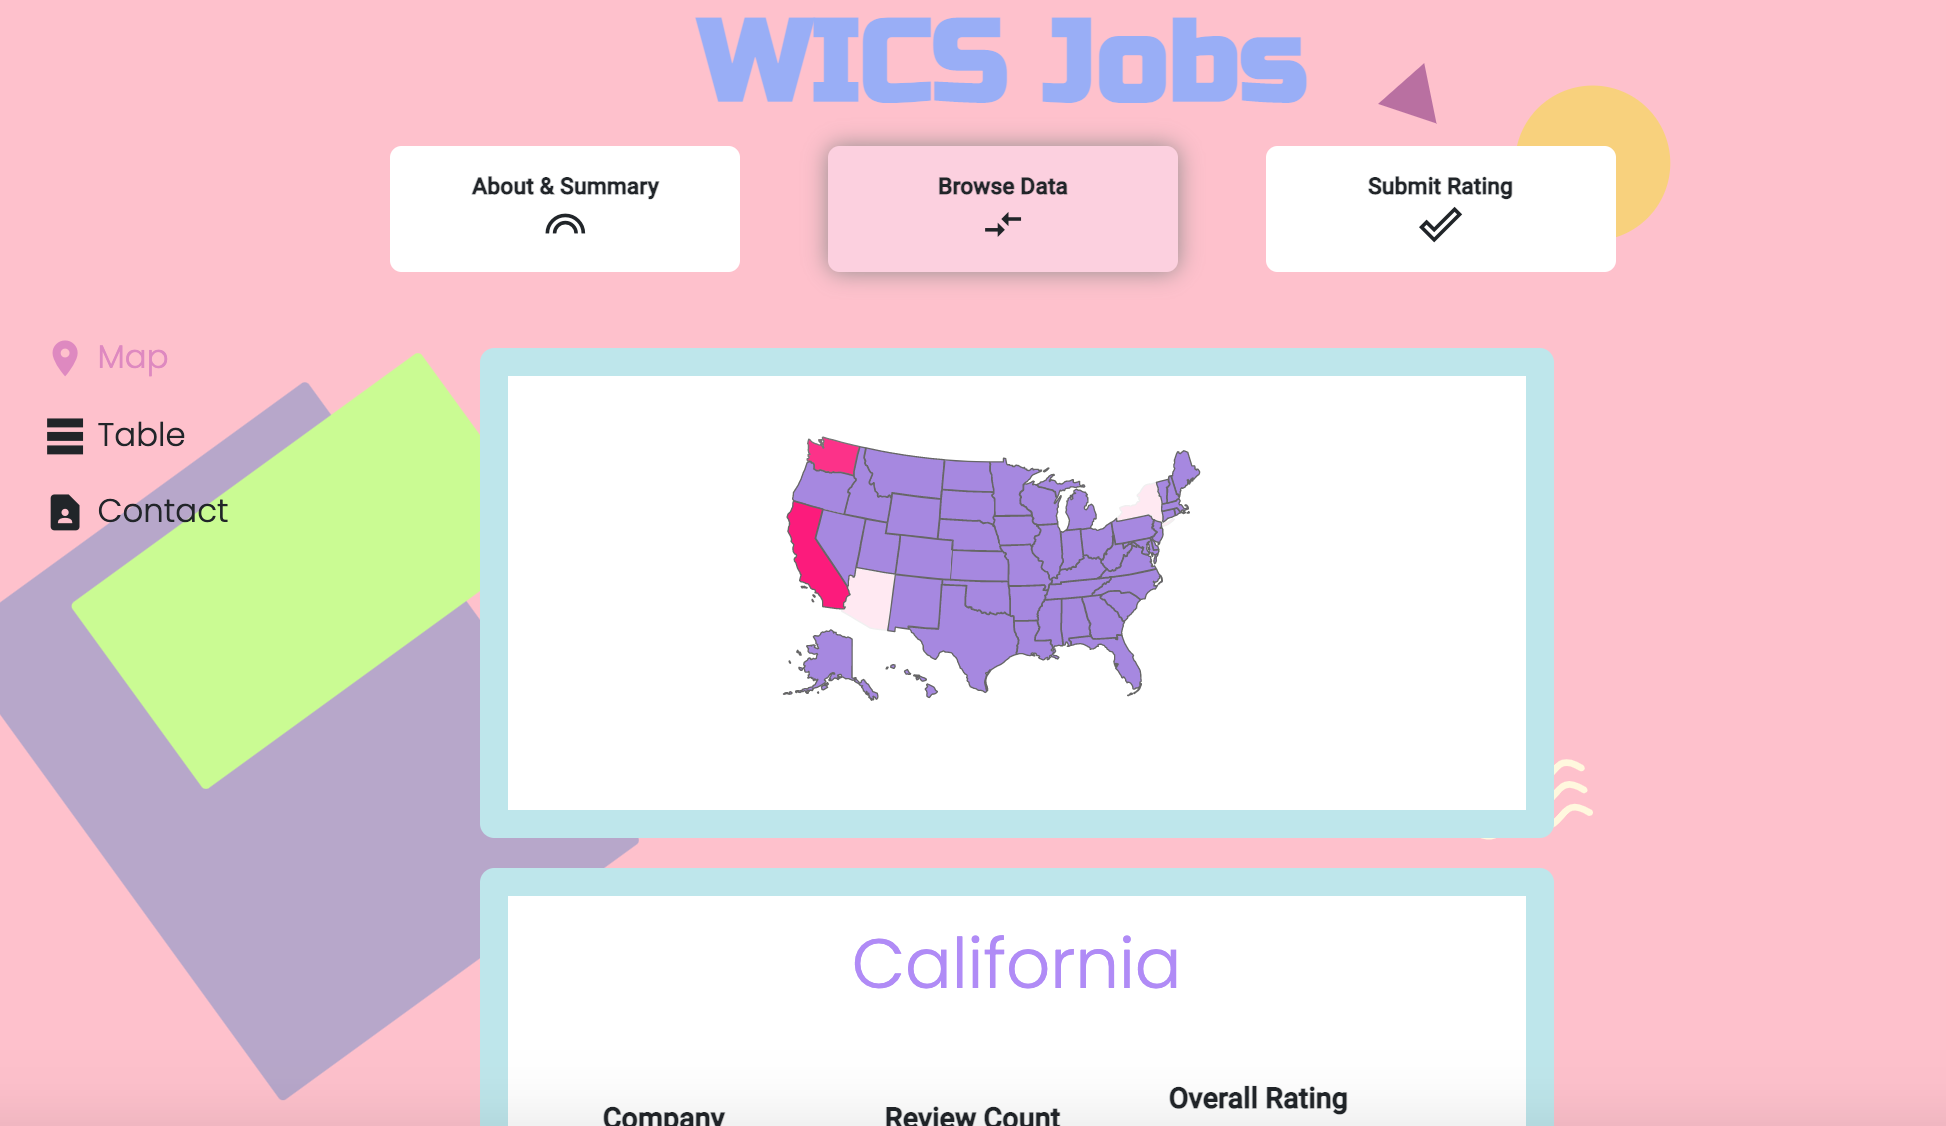 The state map view of the WICS Jobs application